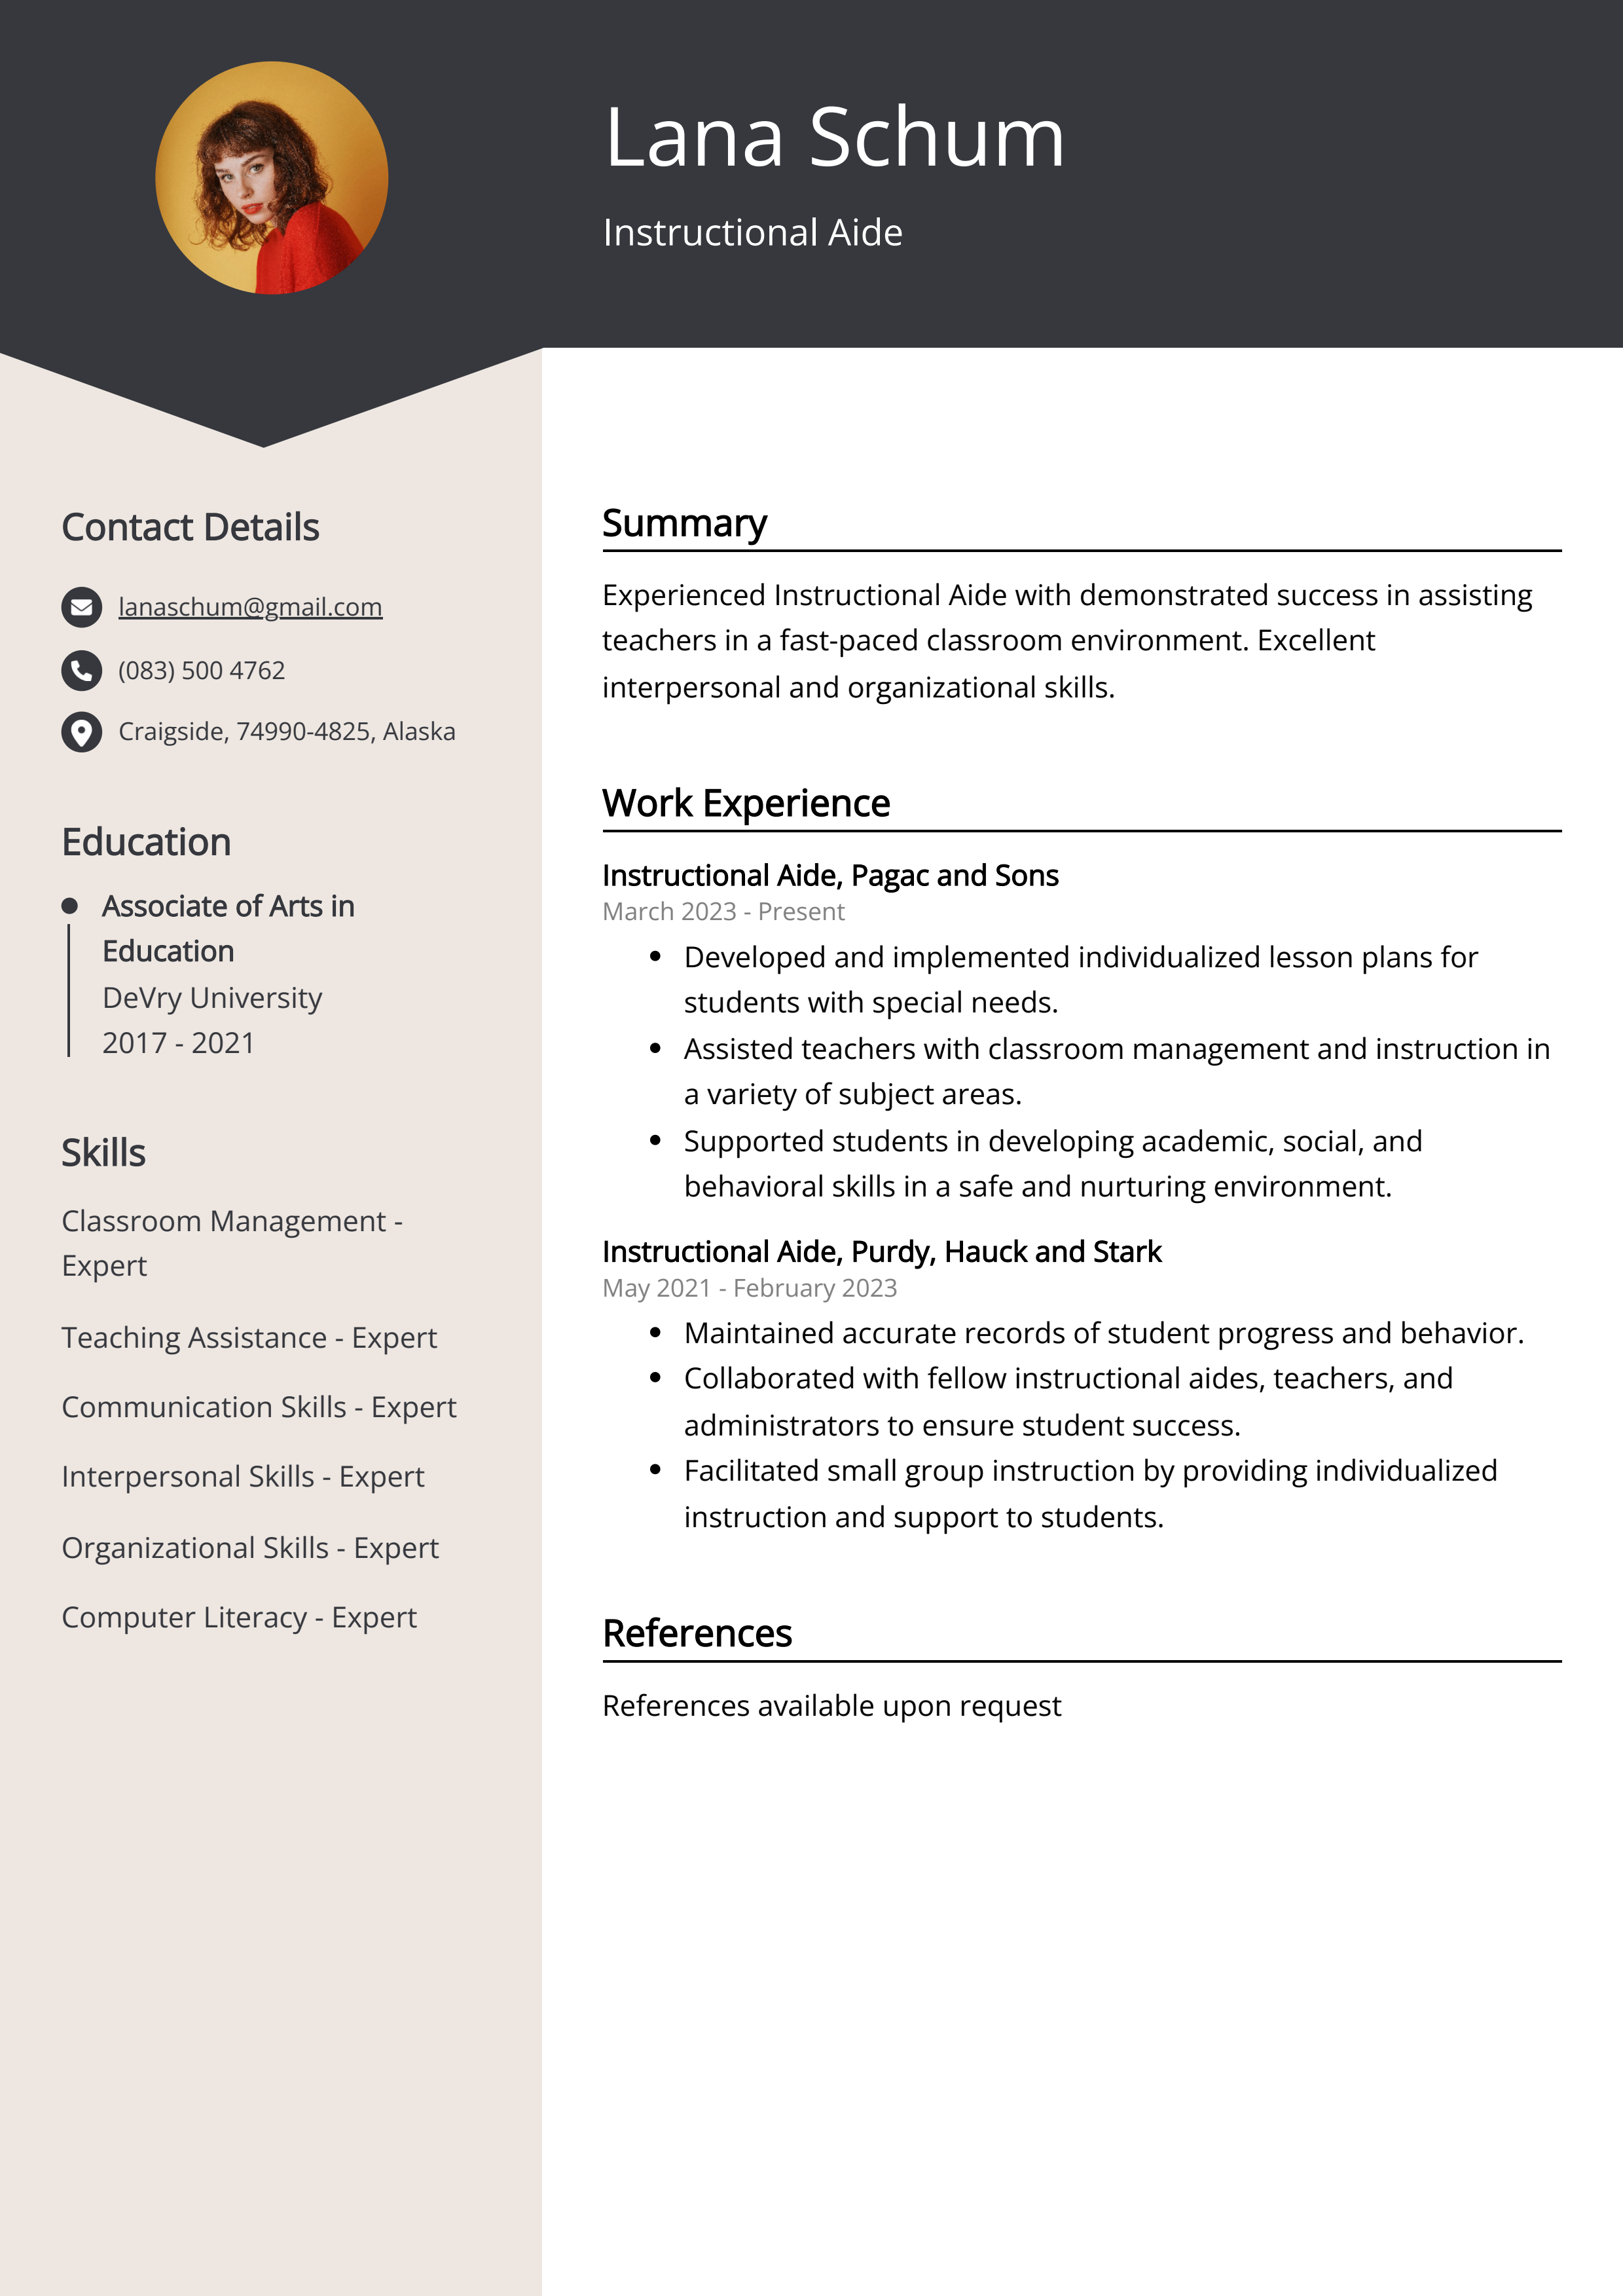 Instructional Aide CV Example